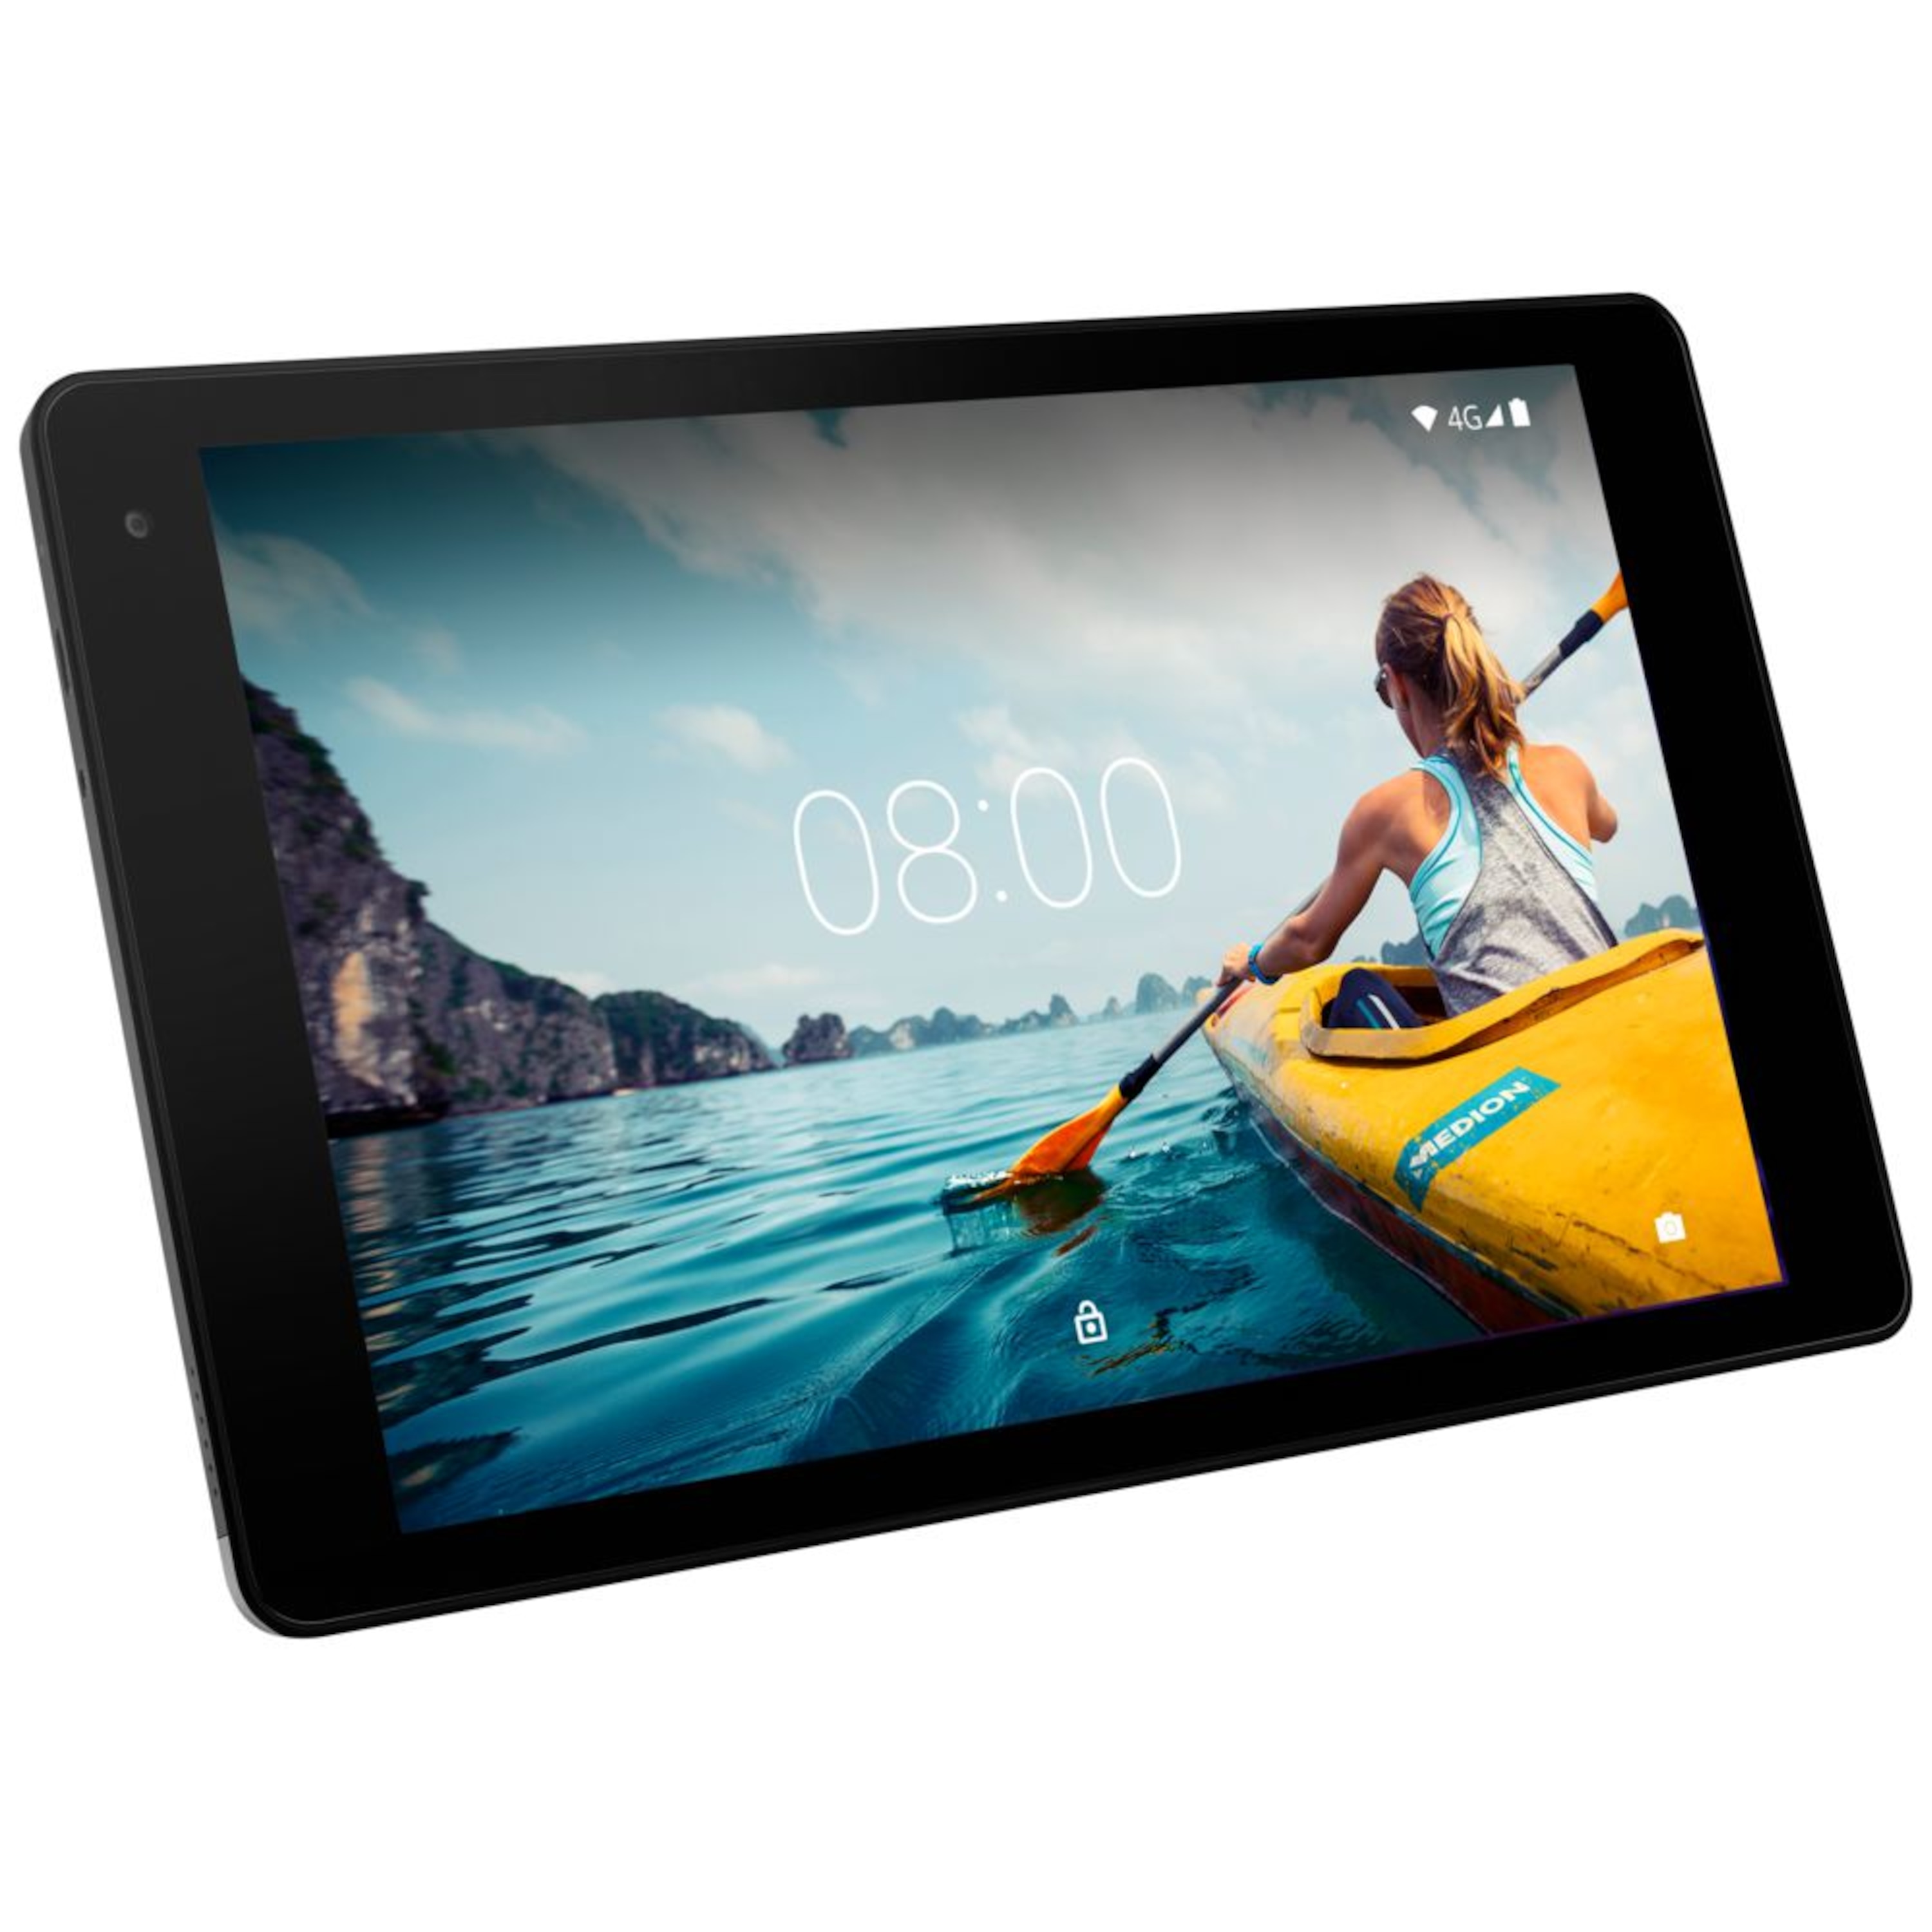 MEDION® LIFETAB® X10605 Tablet, 25,7 cm (10,1“) FHD Display mit Corning® Gorilla® Glass, Update auf Android™ 8, 32 GB Speicher, Octa Core Prozessor, LTE, Quick Charge